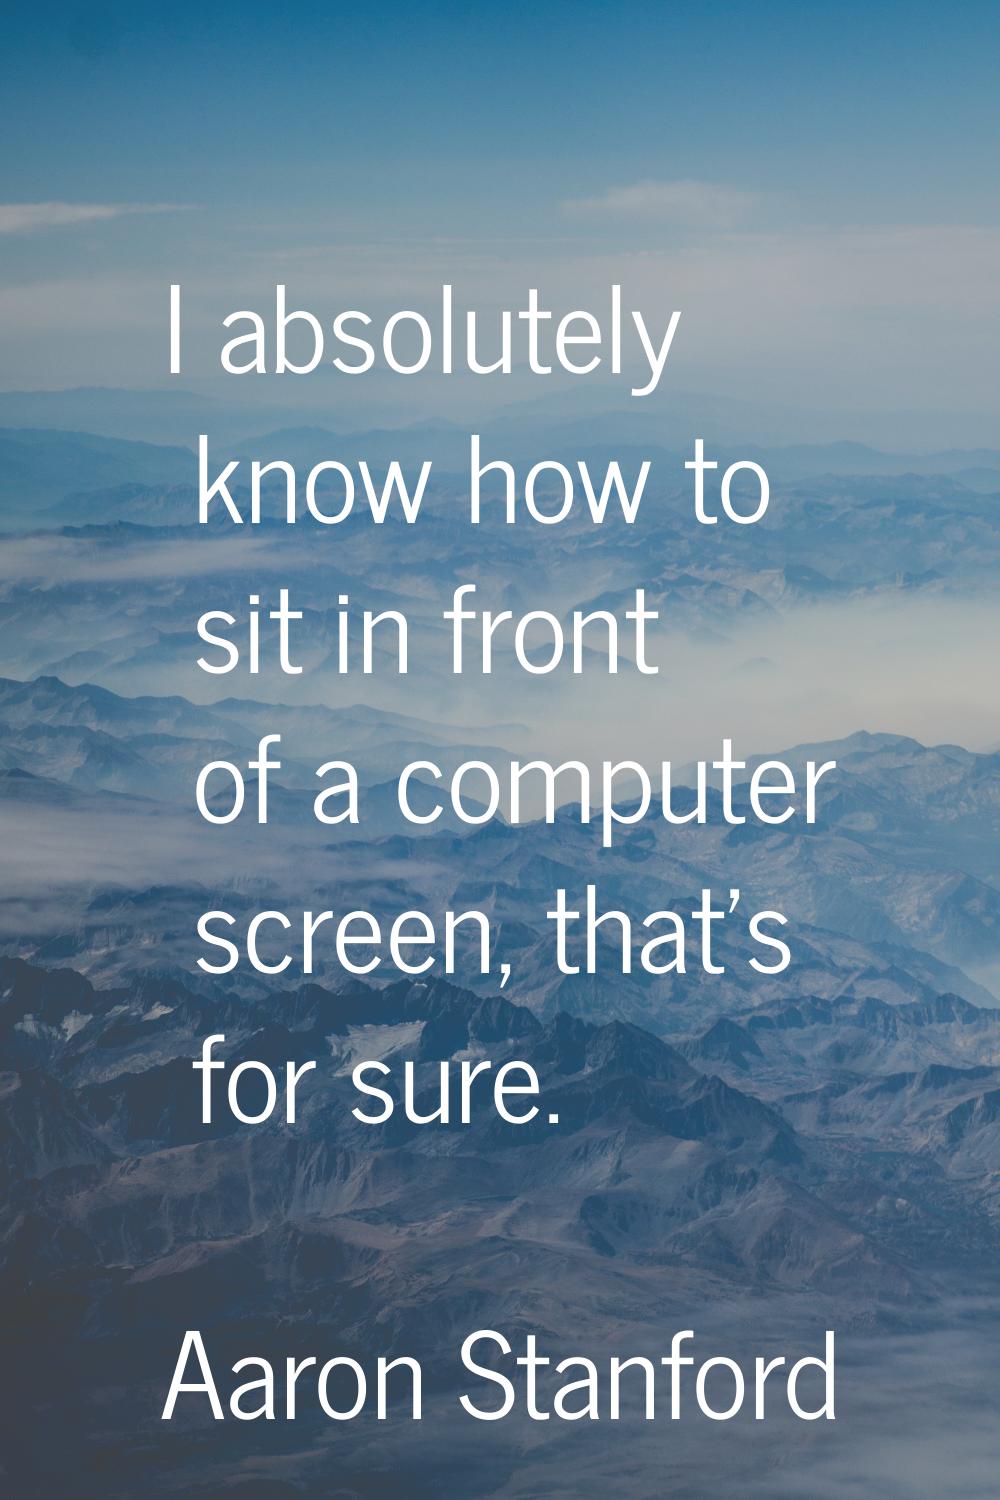 I absolutely know how to sit in front of a computer screen, that's for sure.